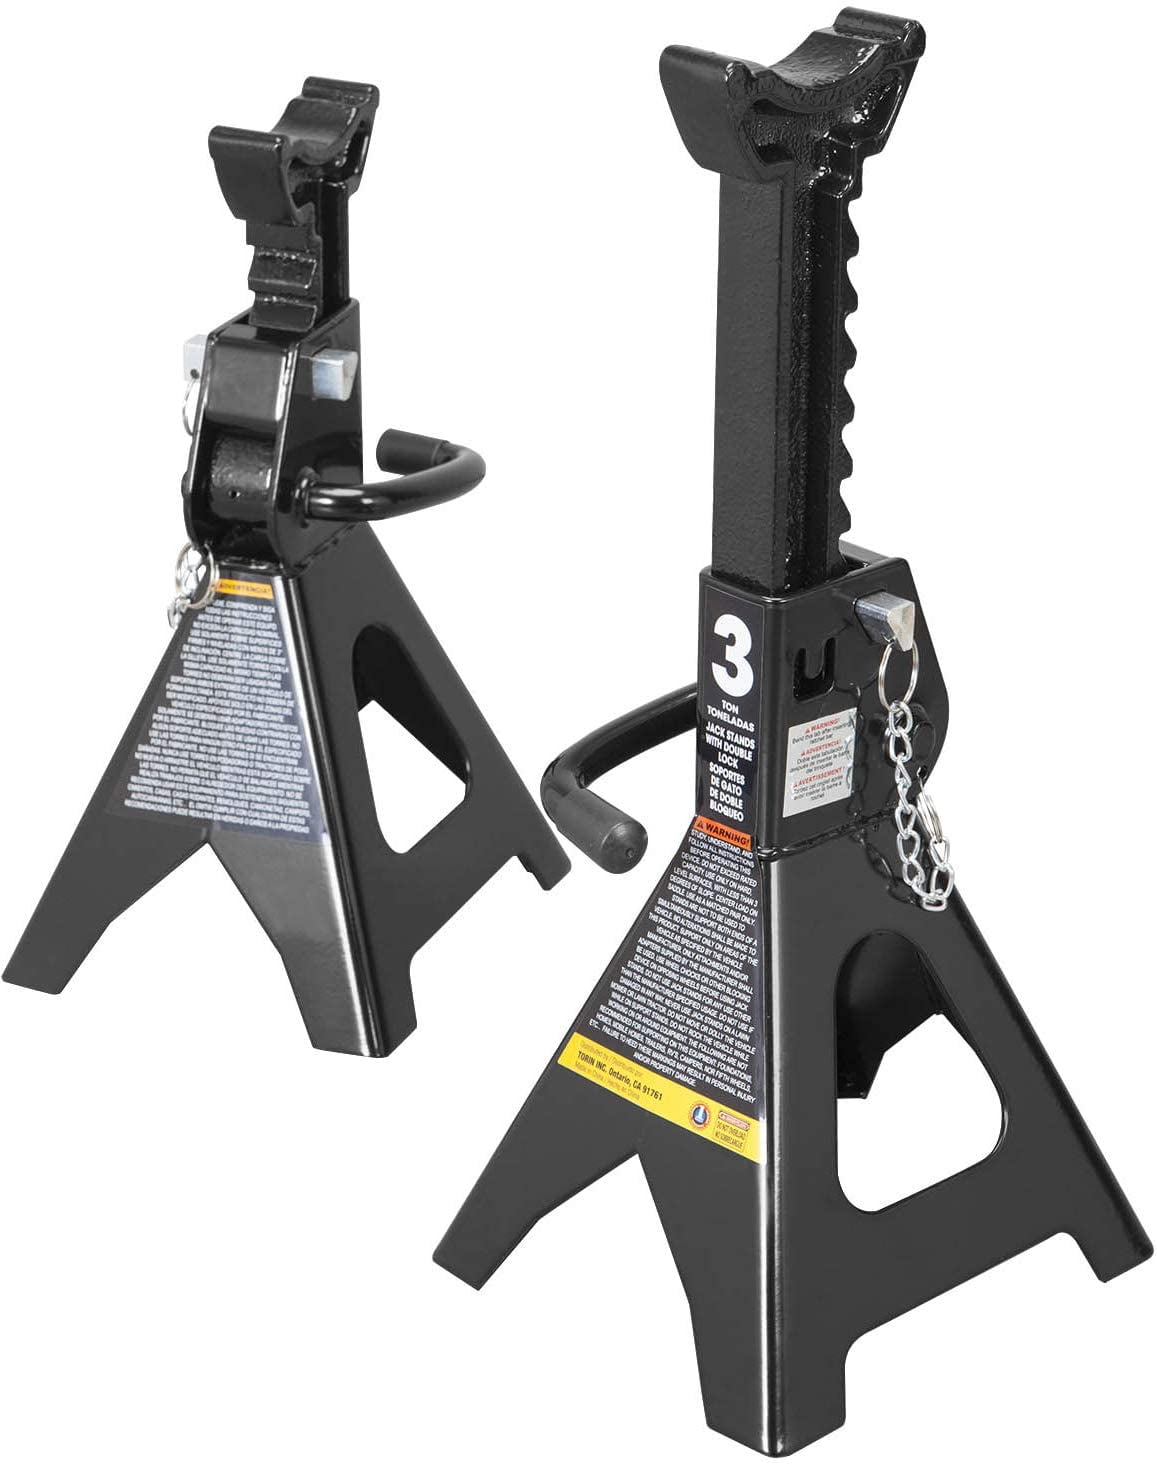 2 Ton Capacity Steel Jack Stands Heavy Duty Safe Car Lift Vehicle Support 1 Pair 